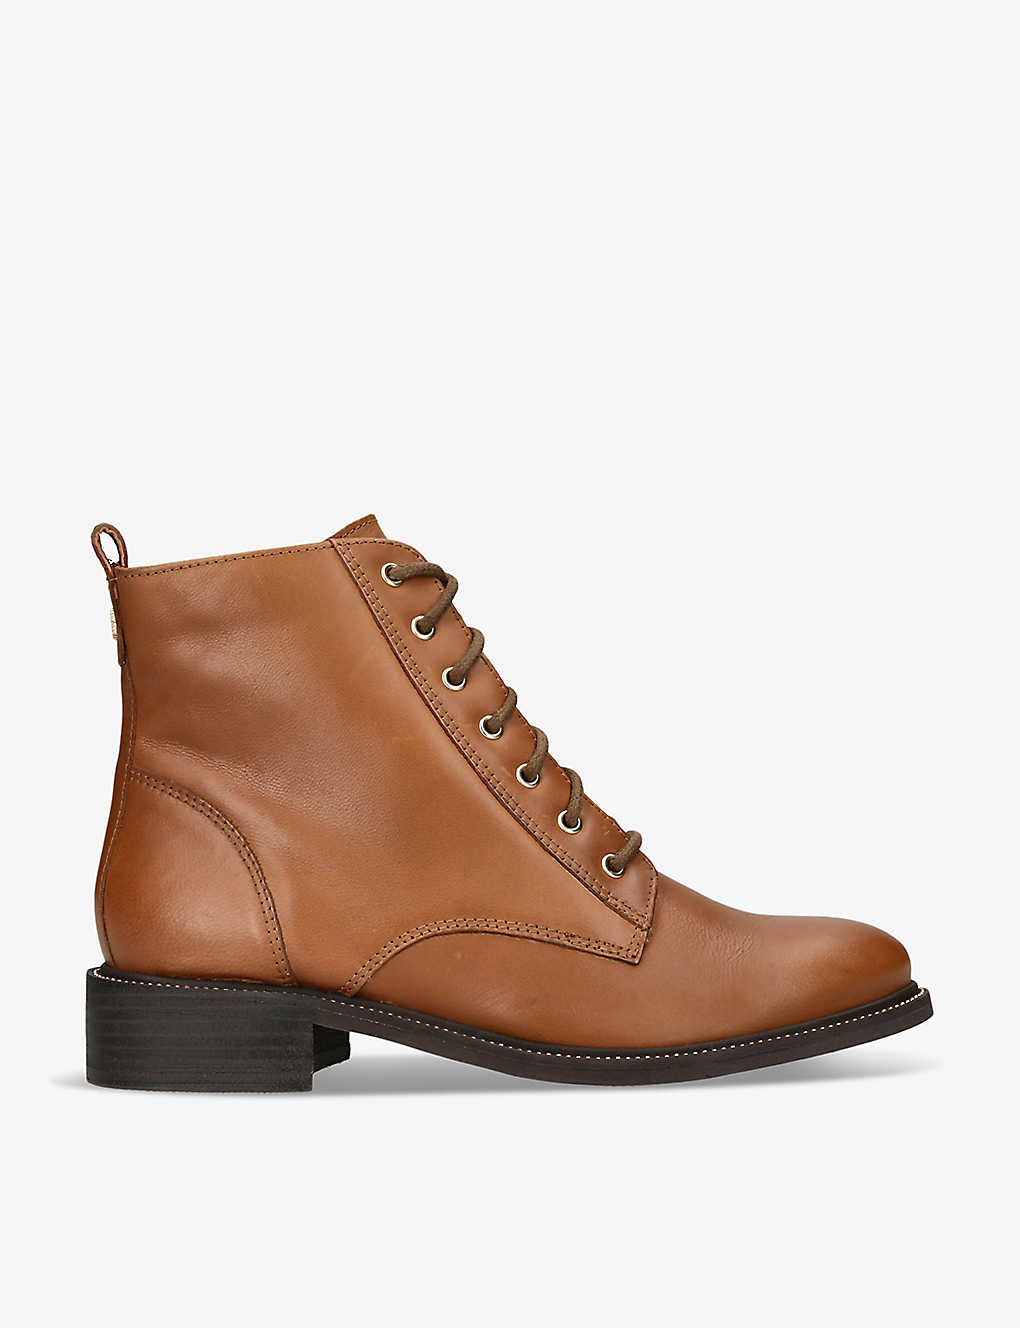 Carvela Womens Tan Spike Lace-up Leather Ankle Boots